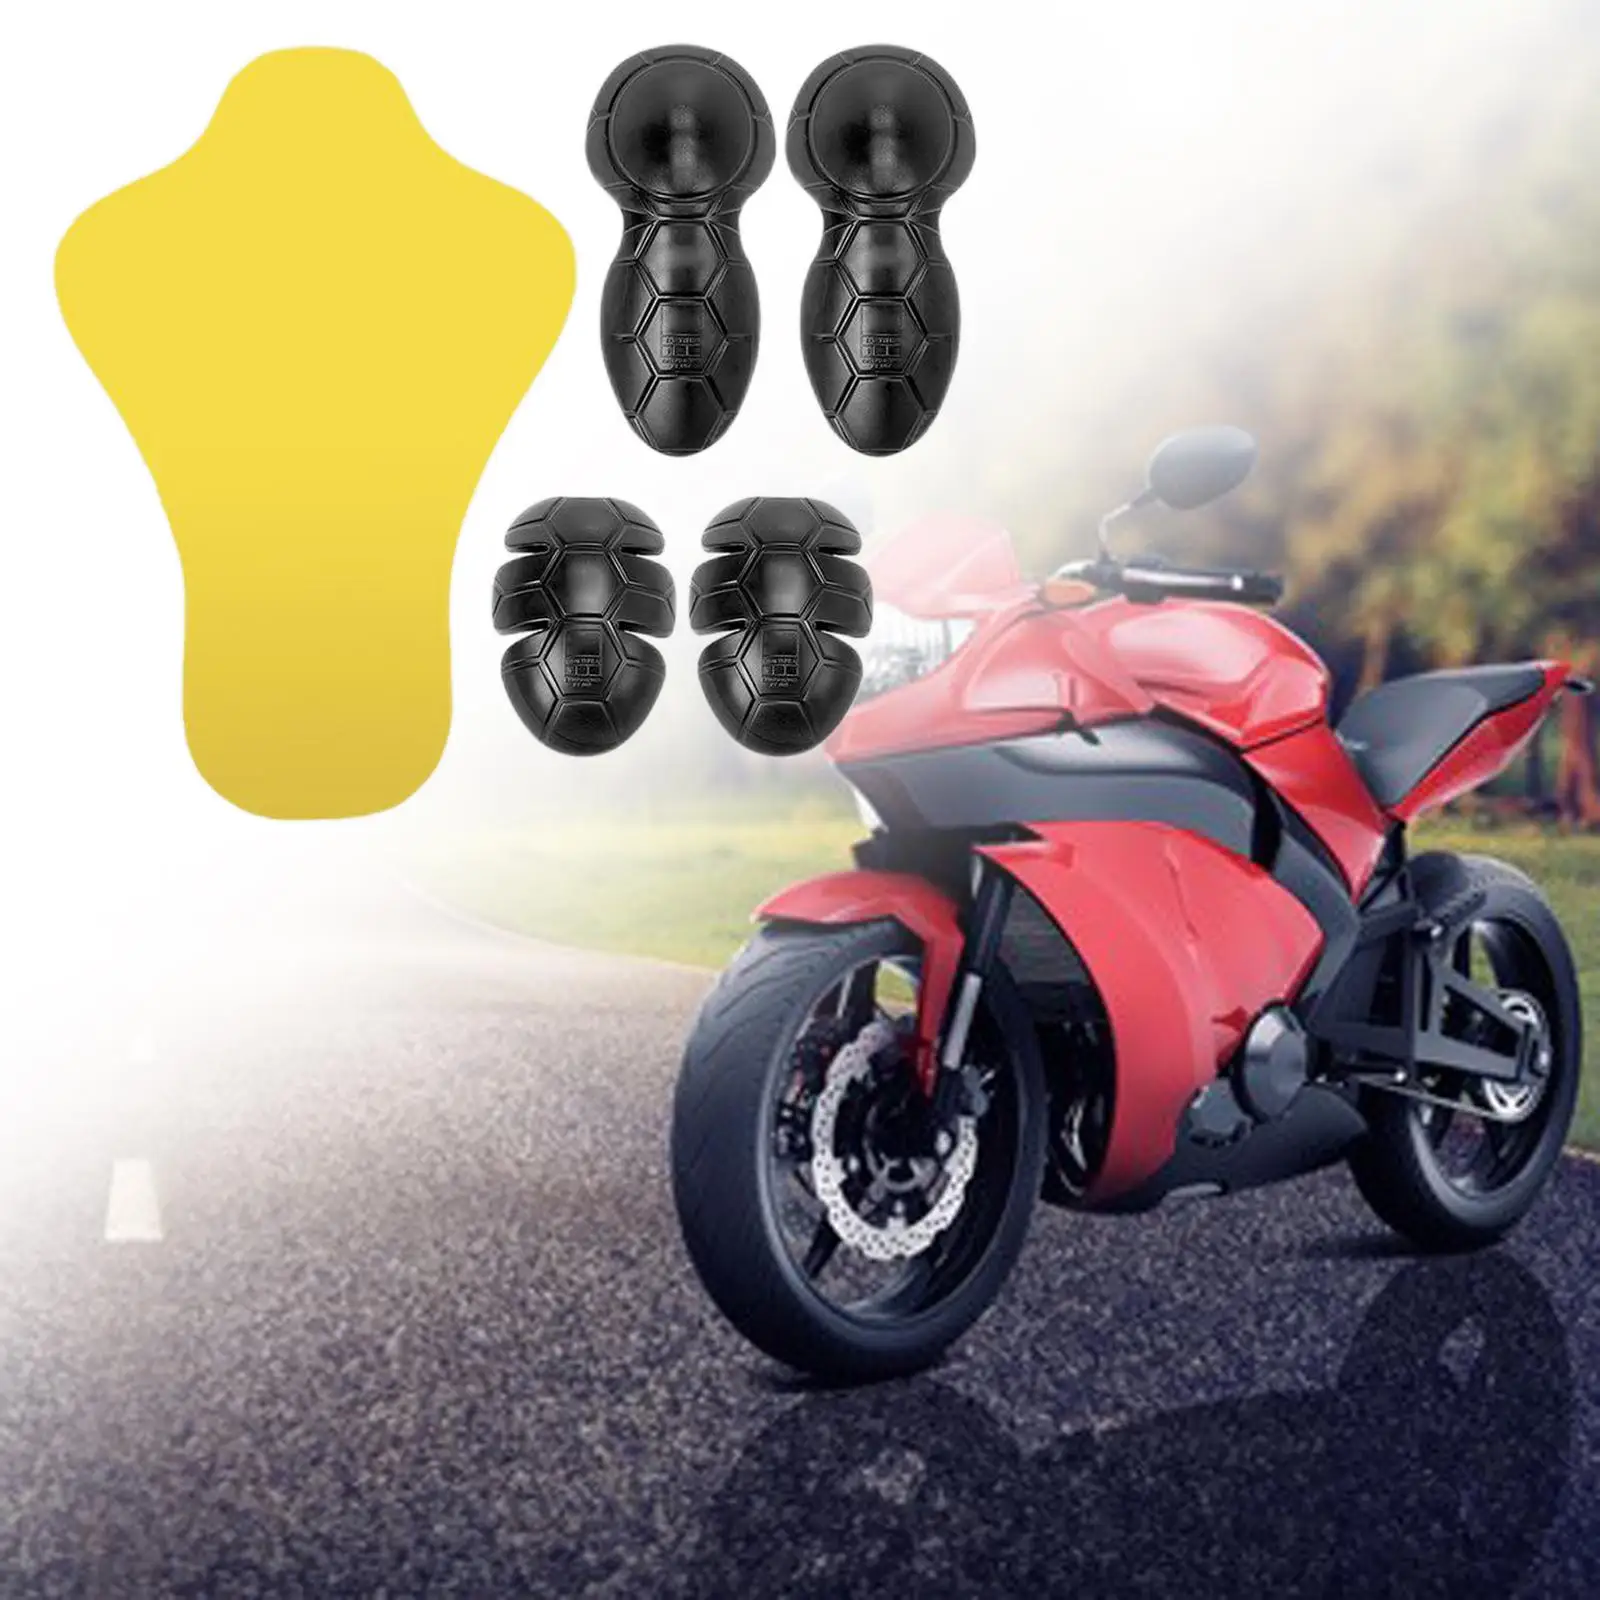 5 Pieces Motorcycle Armor Riding Pads Guards Jacket Protective Inside Gear Armor Vest Racing Guard Motorcycle Biker Equipment